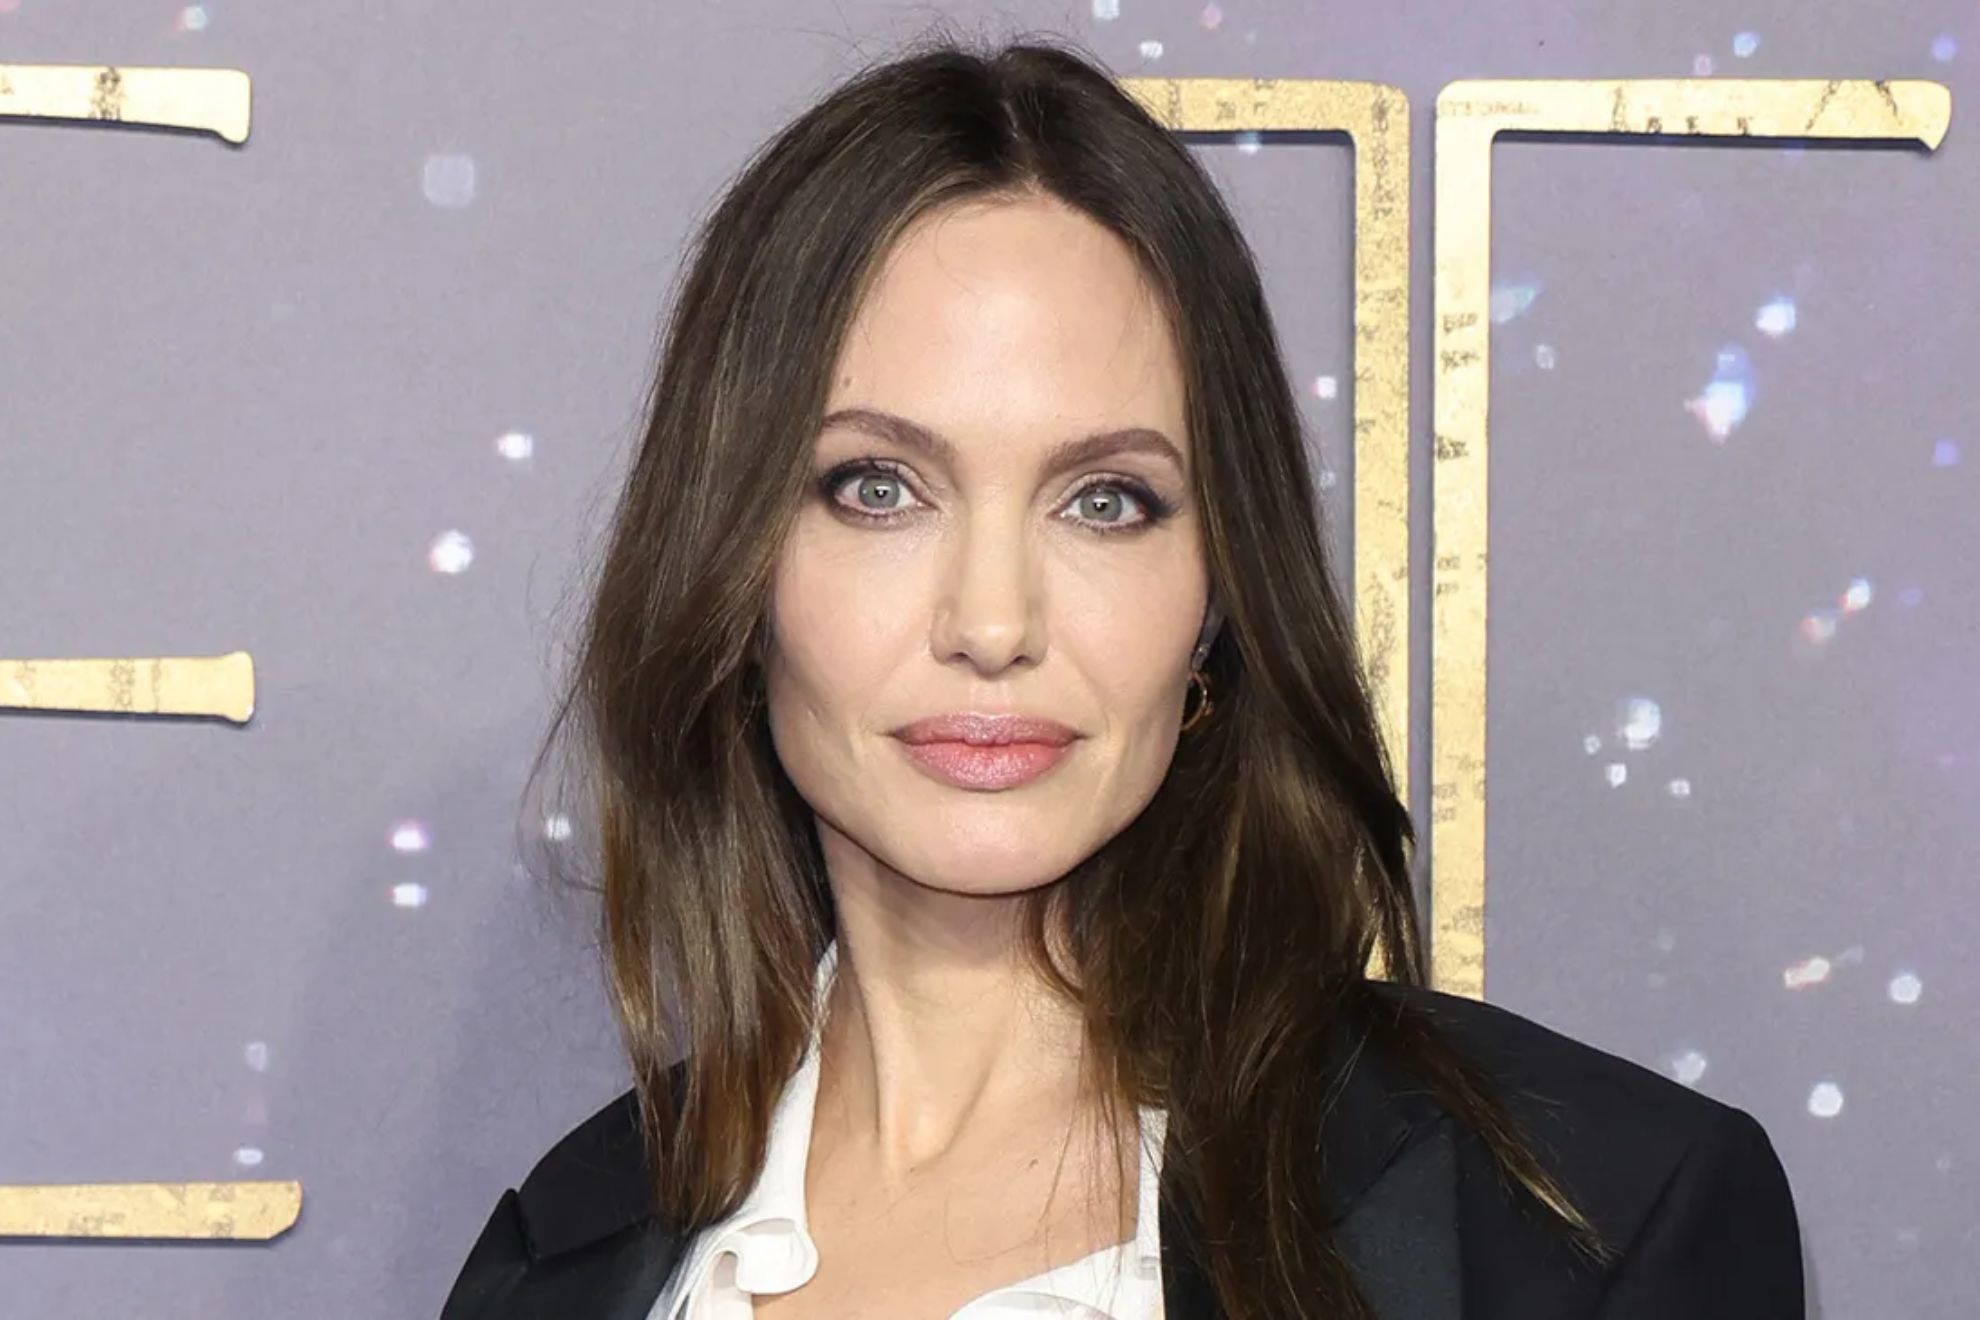 Angelina Jolie worries about her extreme thinness: She forgets to eat or doesnt want to eat... she looks sickly